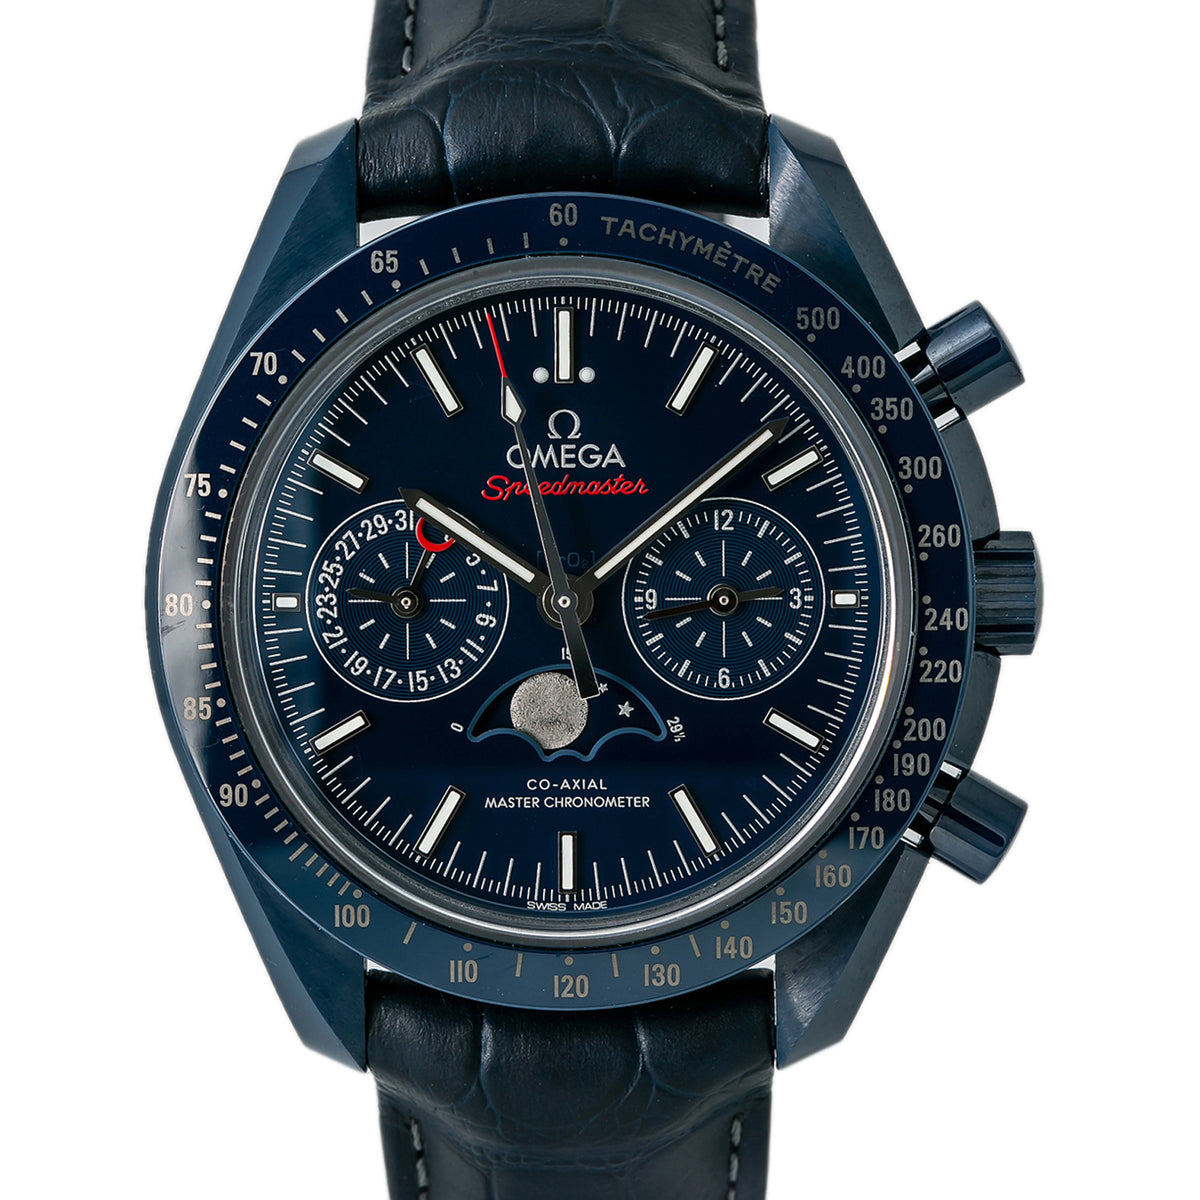 Omega Speedmaster Blue Side of the Moon 304.93.44.52.03.001 Automatic Watch 44mm